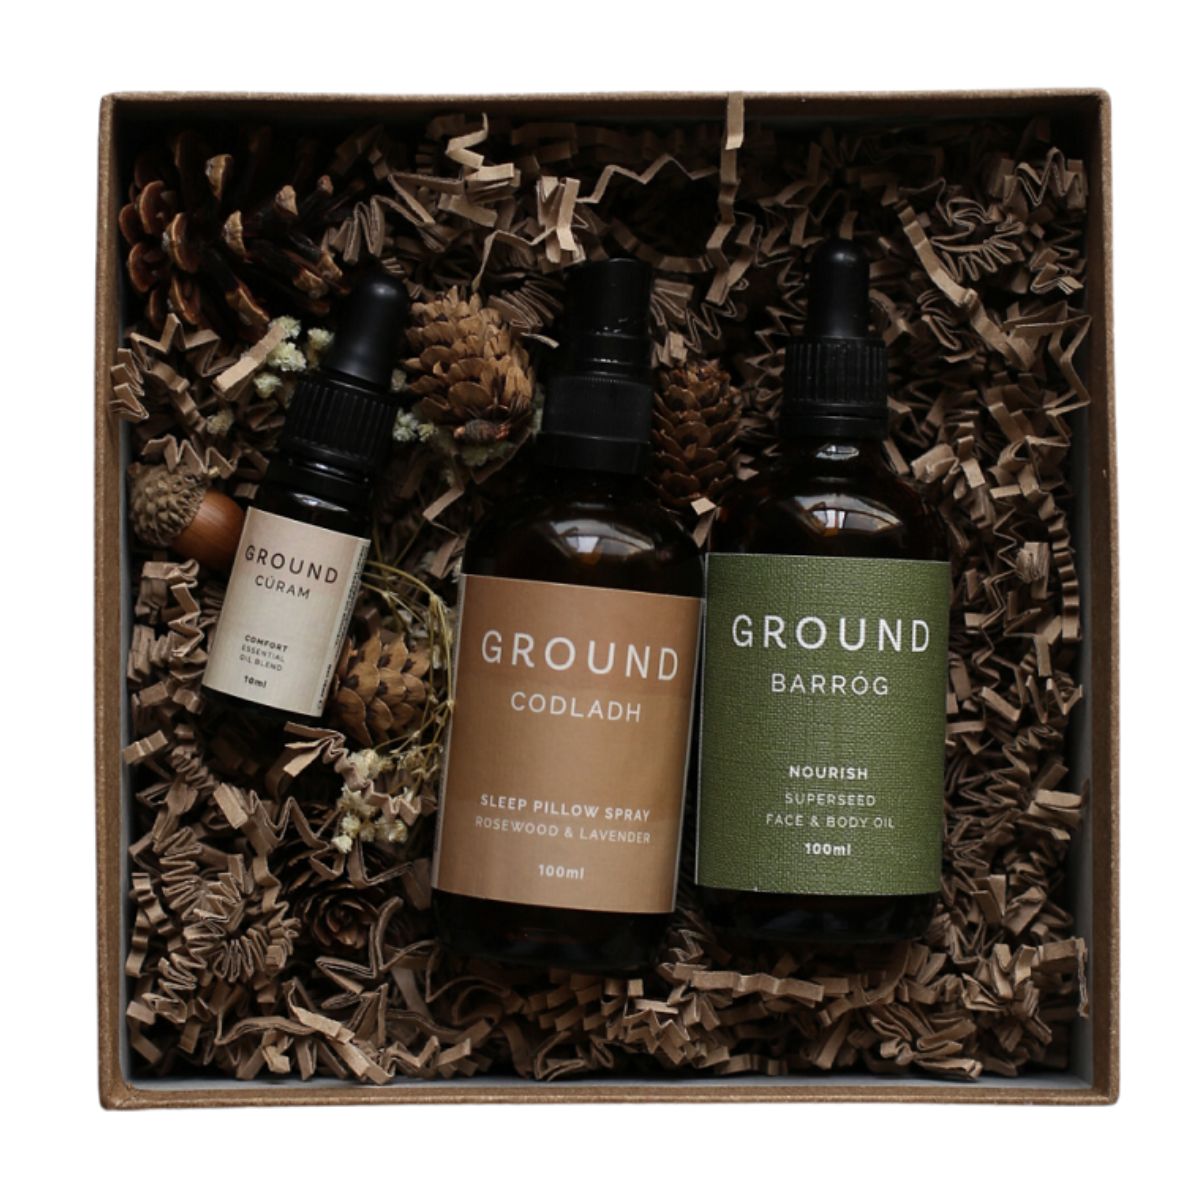 GROUND The Journey IVF Gift Box